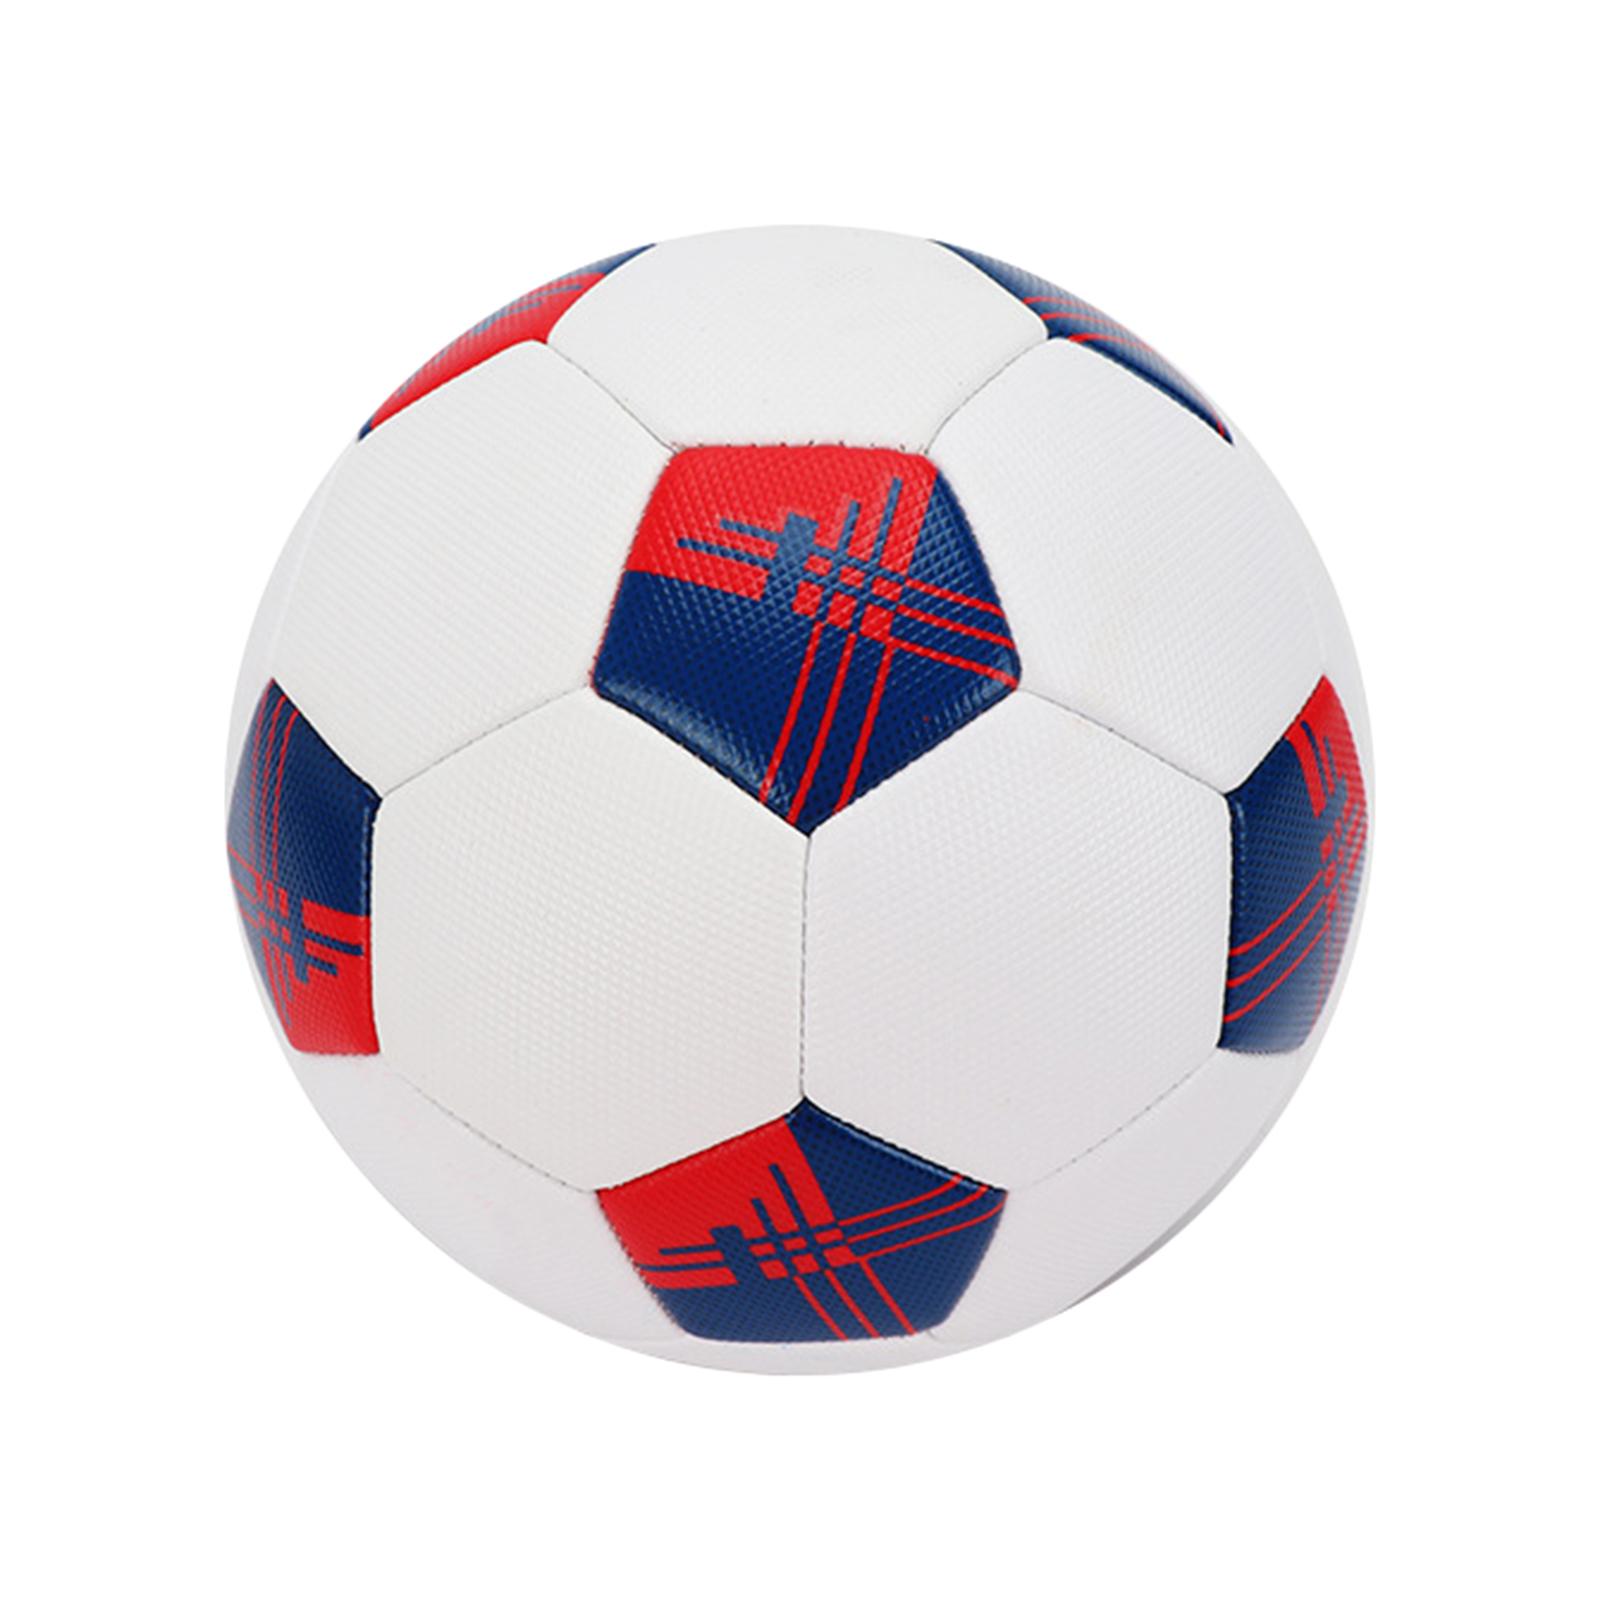 Football Official Size 5 Team Sports Gifts Ball Toys Quality Red Blue